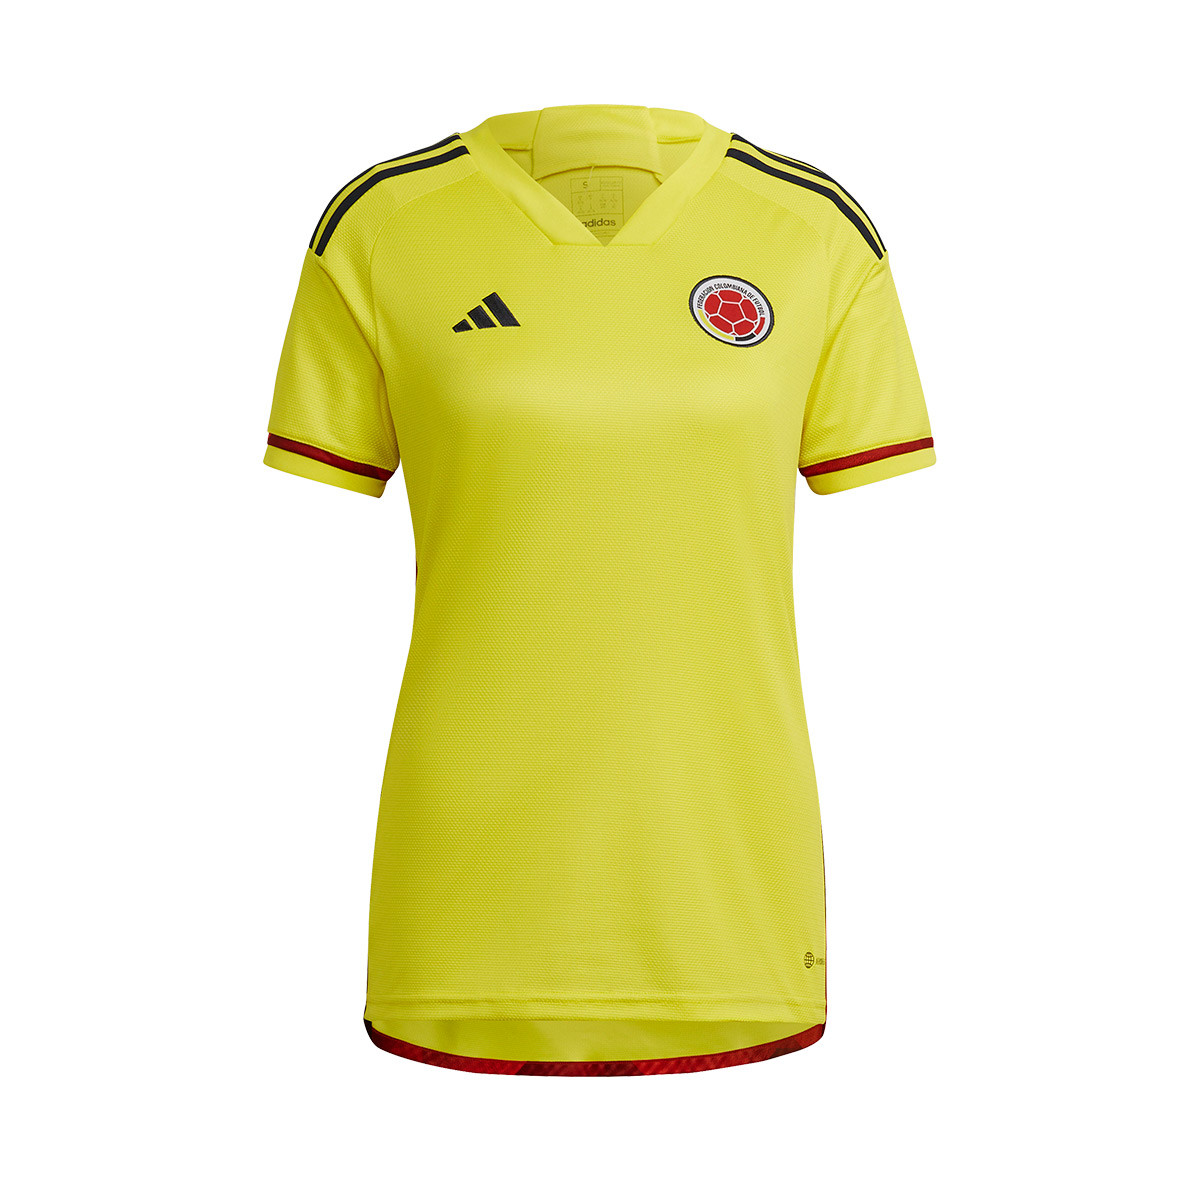 Colombia National Team adidas Youth Practice Training Jersey - Light Blue